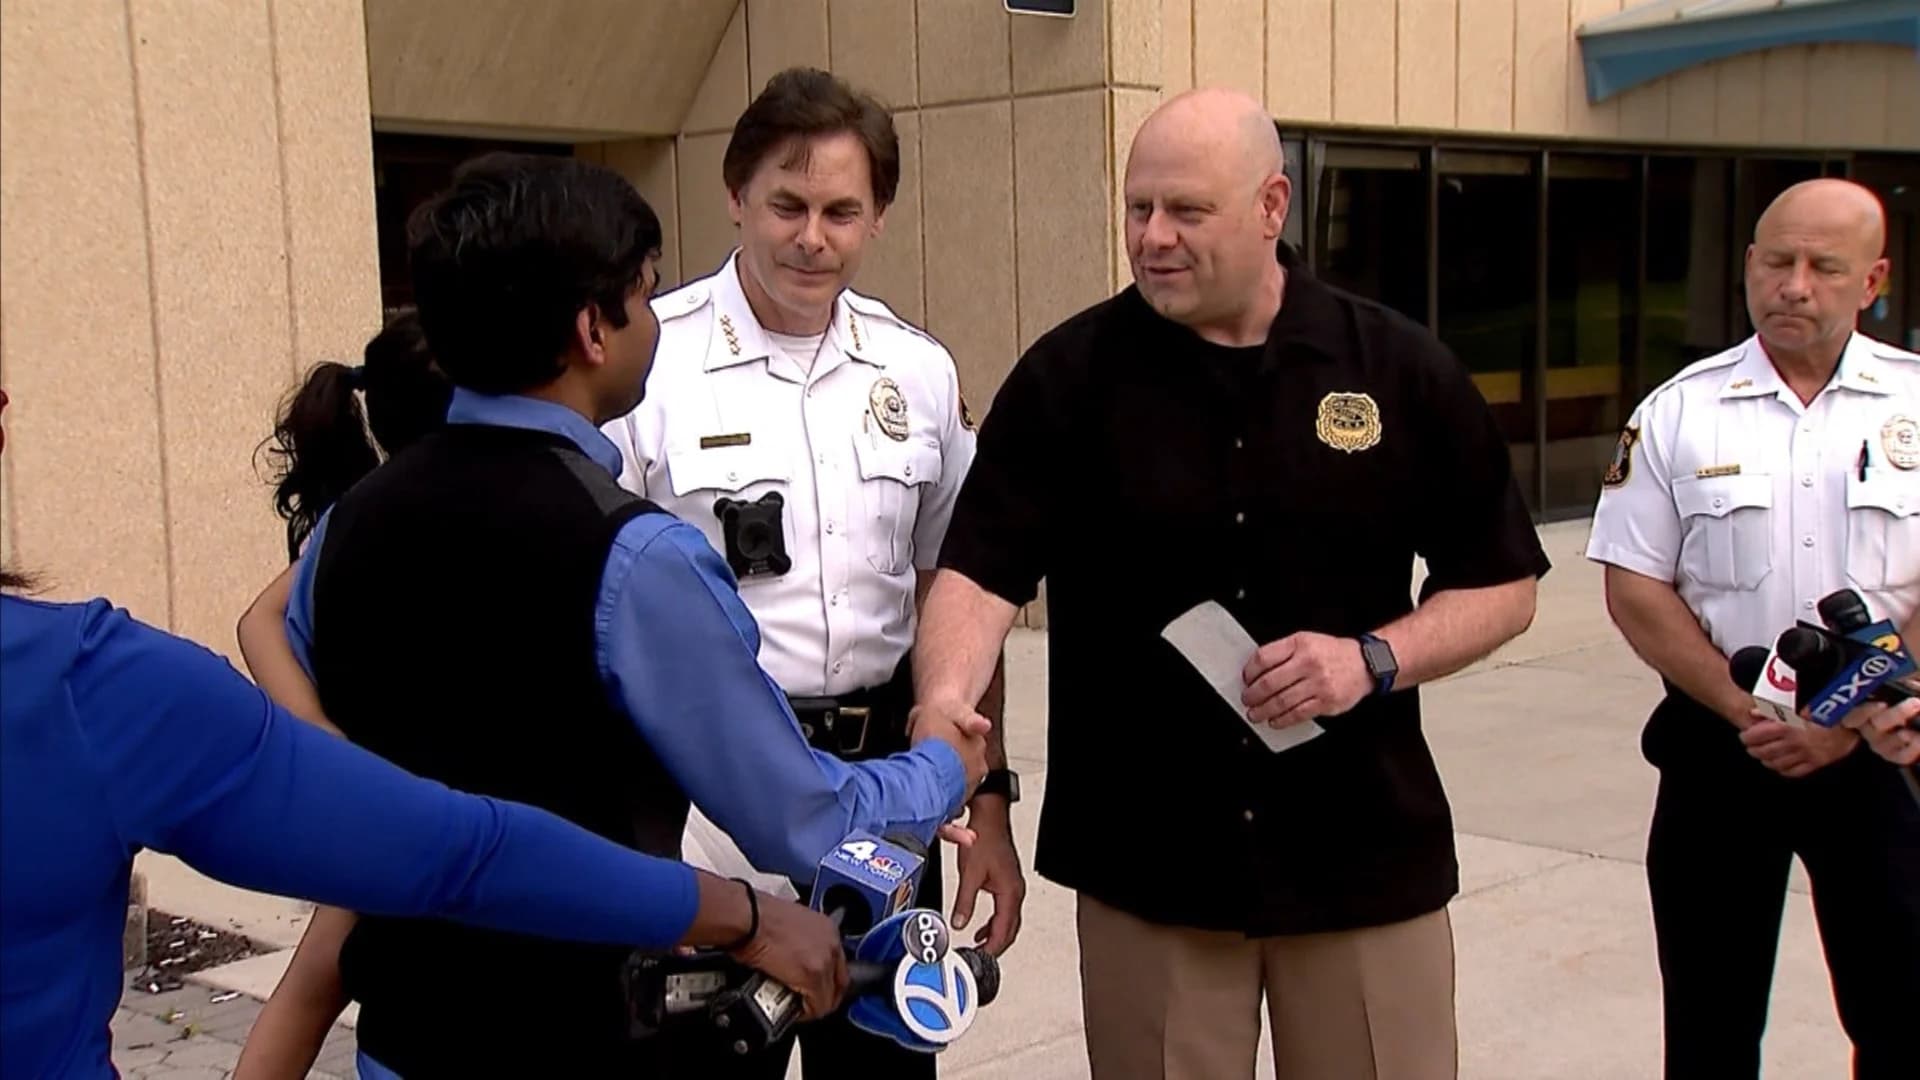 Edison police honor man who rescued woman who fell onto train tracks